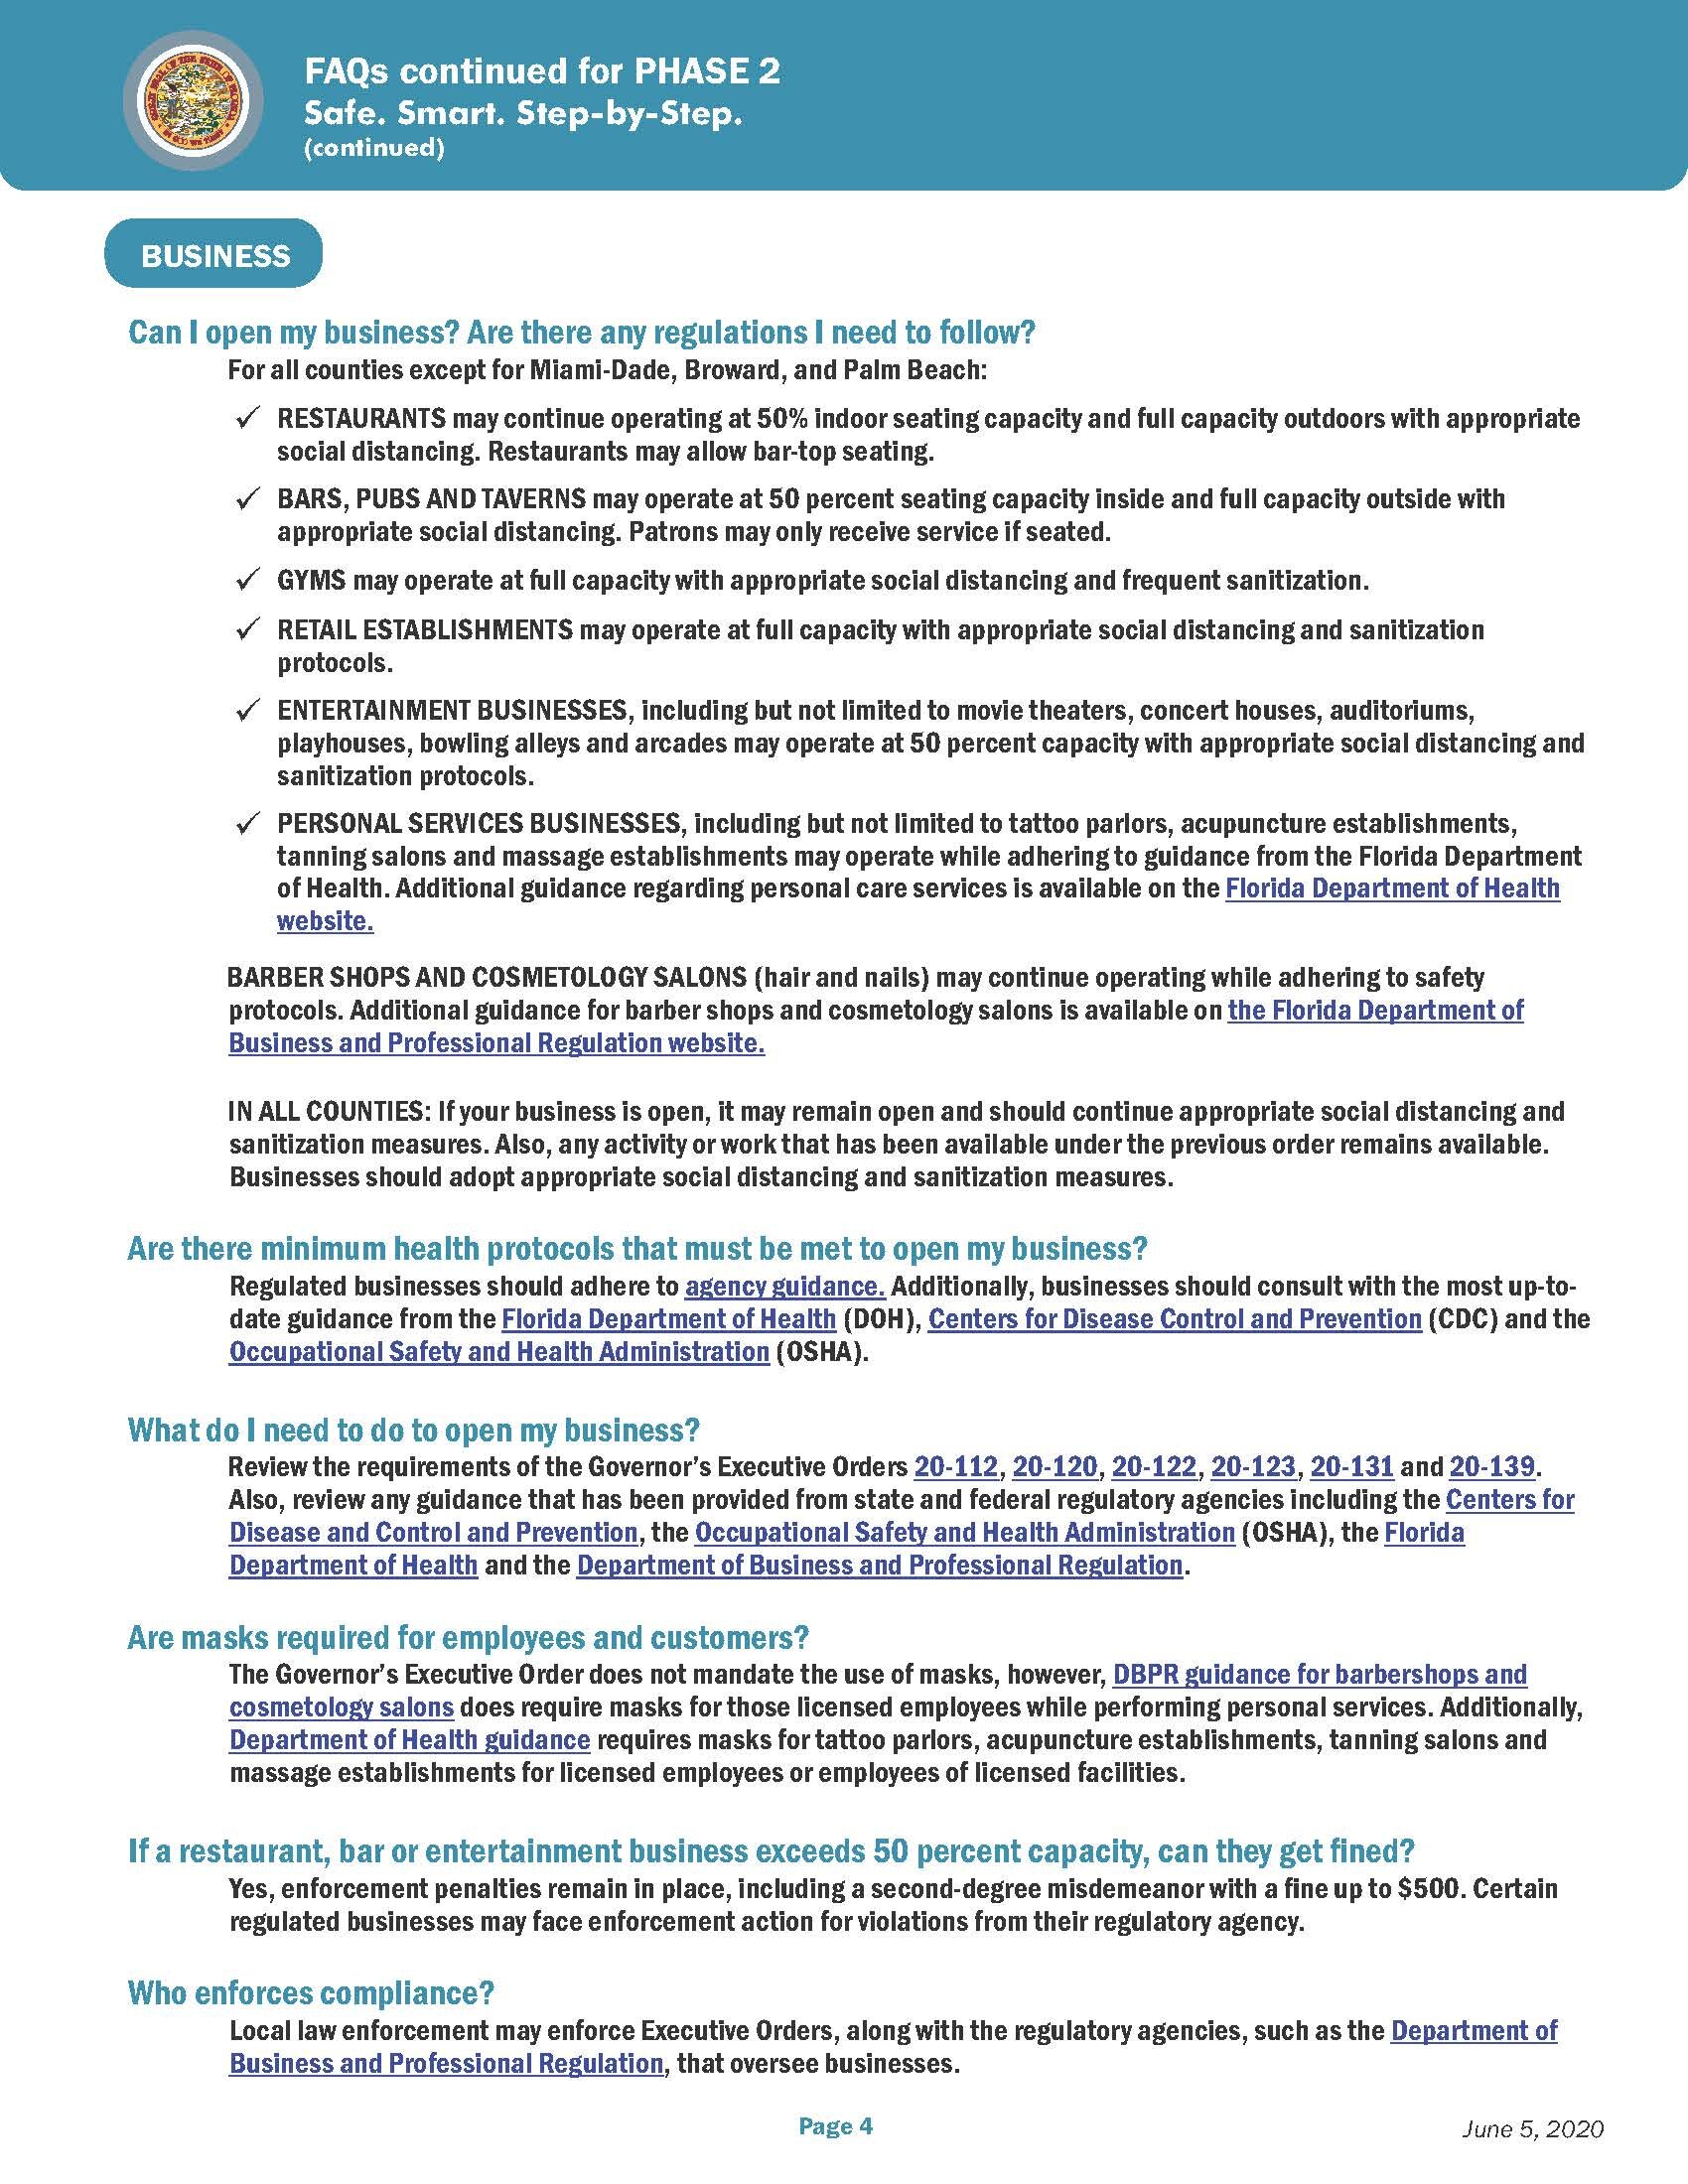 Exec Order Phase 2 FAQs_Page_4.jpg